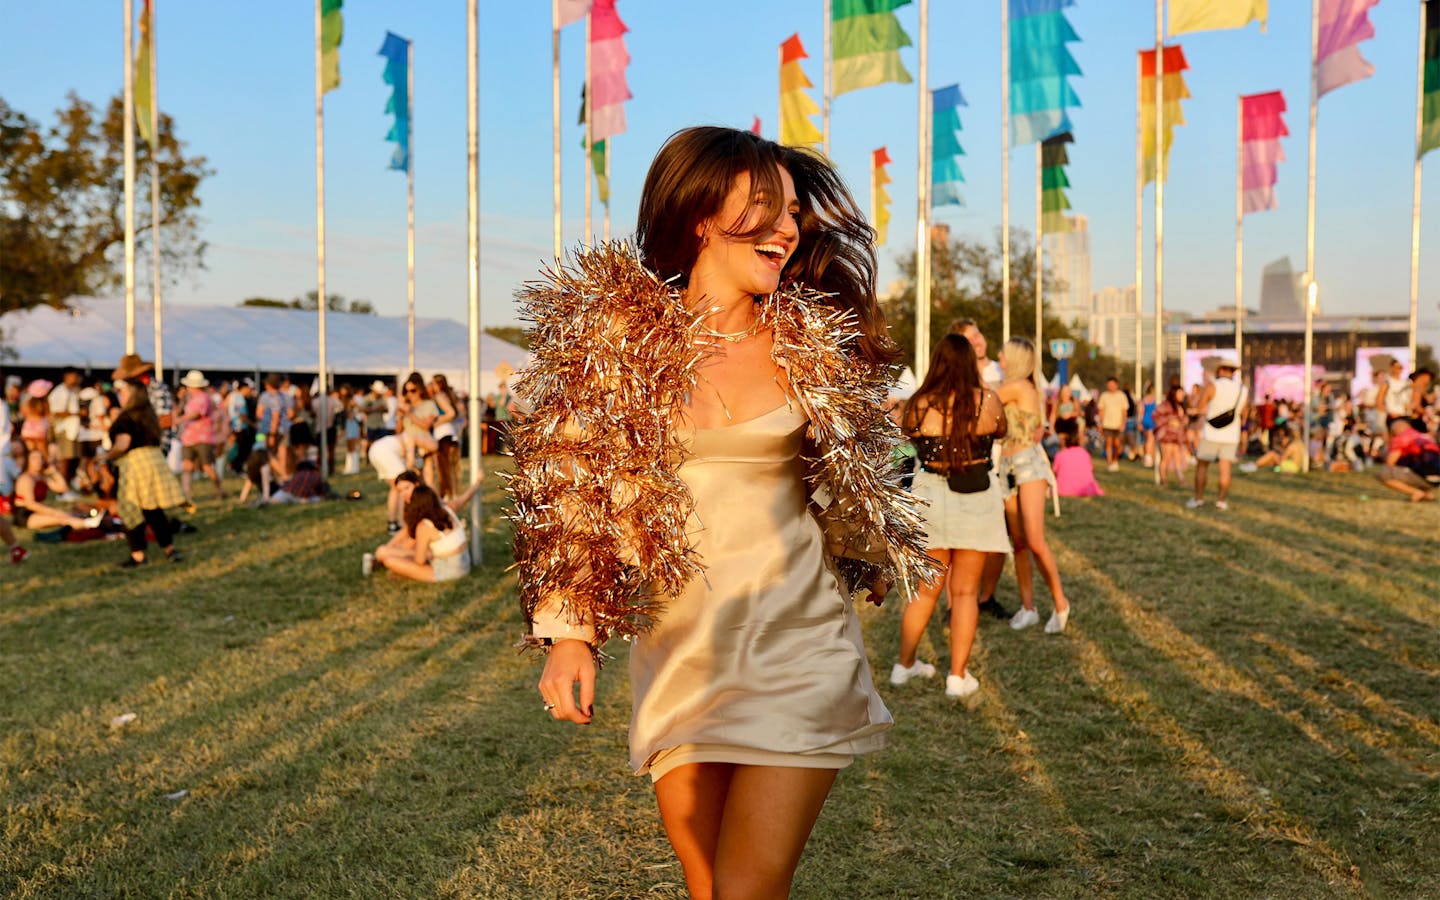 https://img.texasmonthly.com/2022/10/acl-festival-fashion-sparkle-jacket.jpg?auto=compress&crop=faces&fit=crop&fm=jpg&h=900&ixlib=php-3.3.1&q=45&w=1600